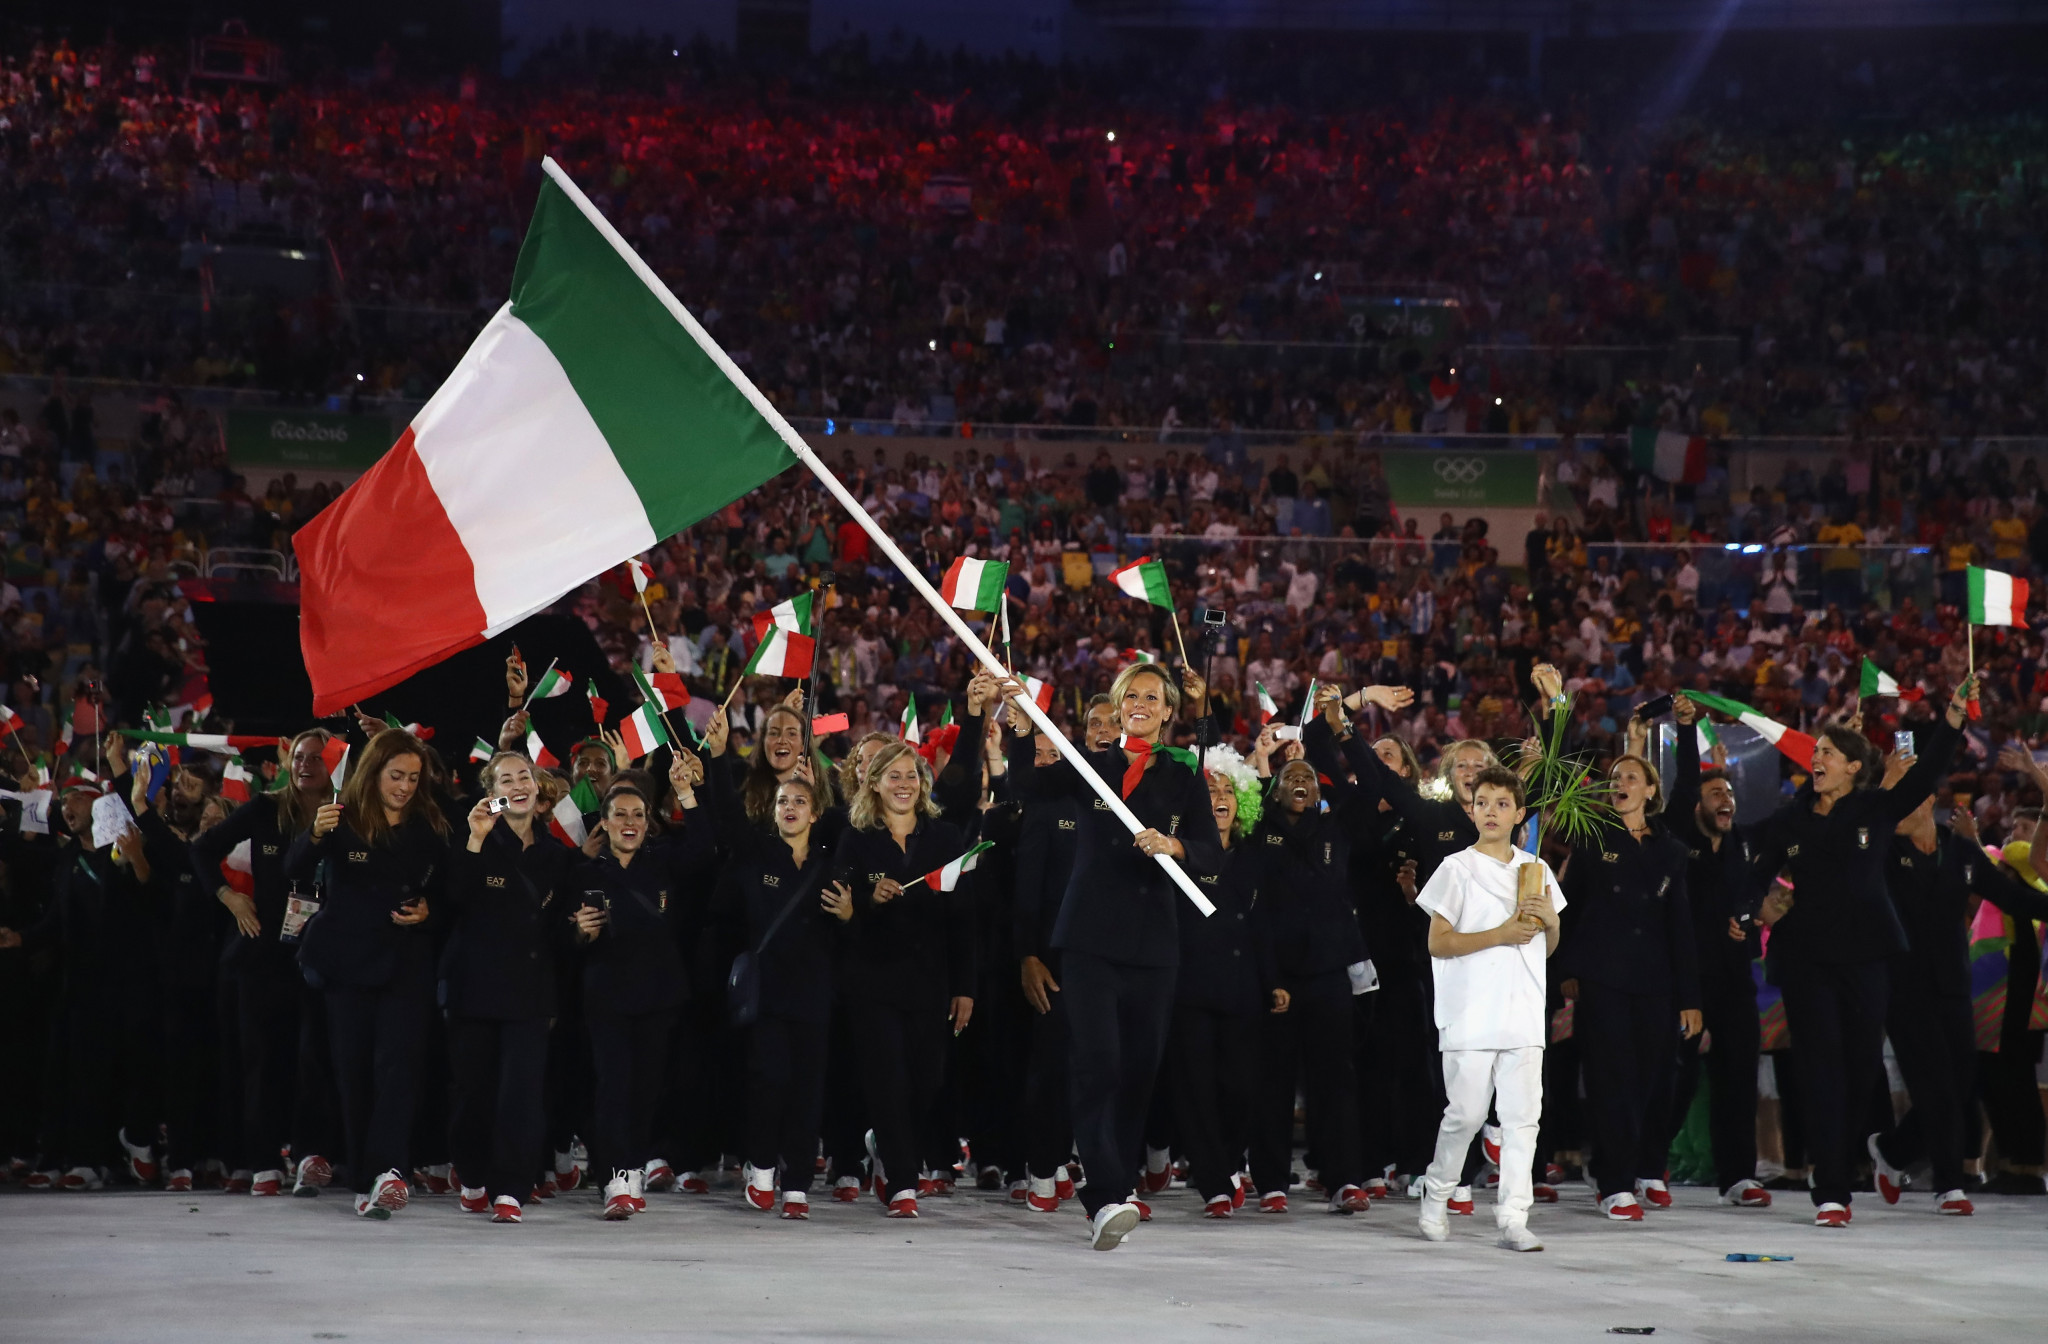 Italy is one of the countries which could come into conflict with the IOC over Government interference ©Getty Images